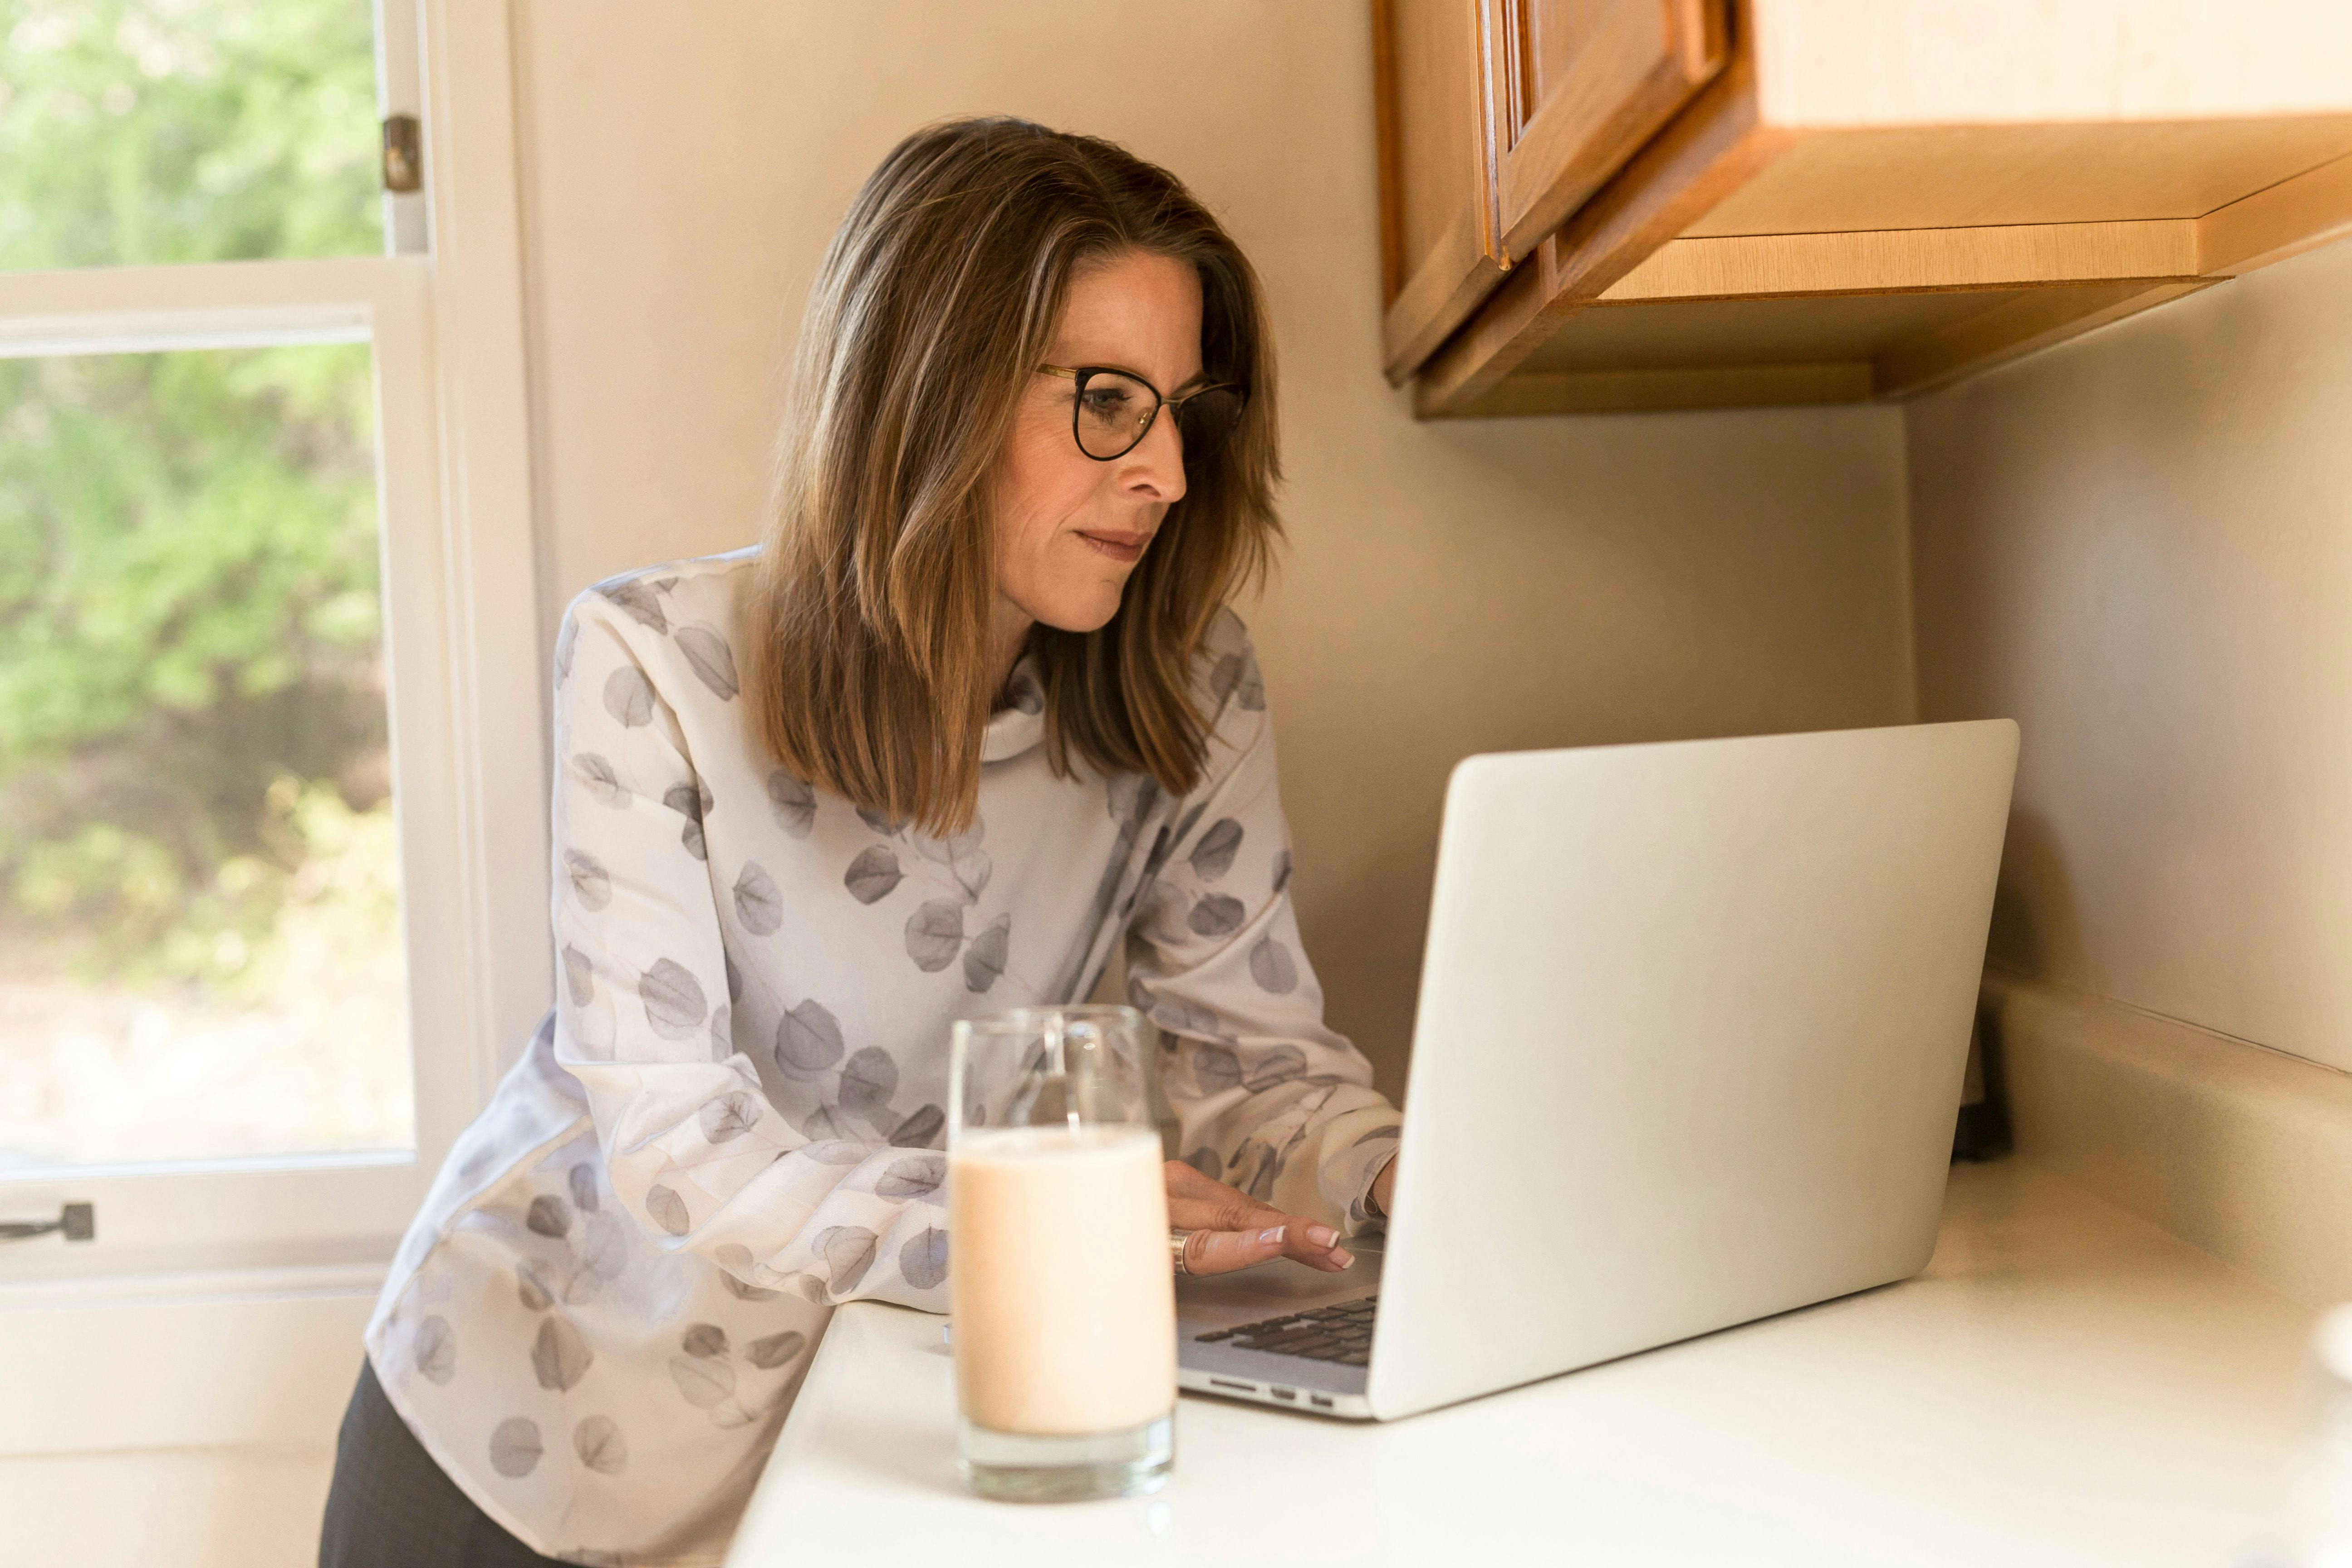 Woman standing at her kitchen bench looking at a laptop and drinking a glass of milk